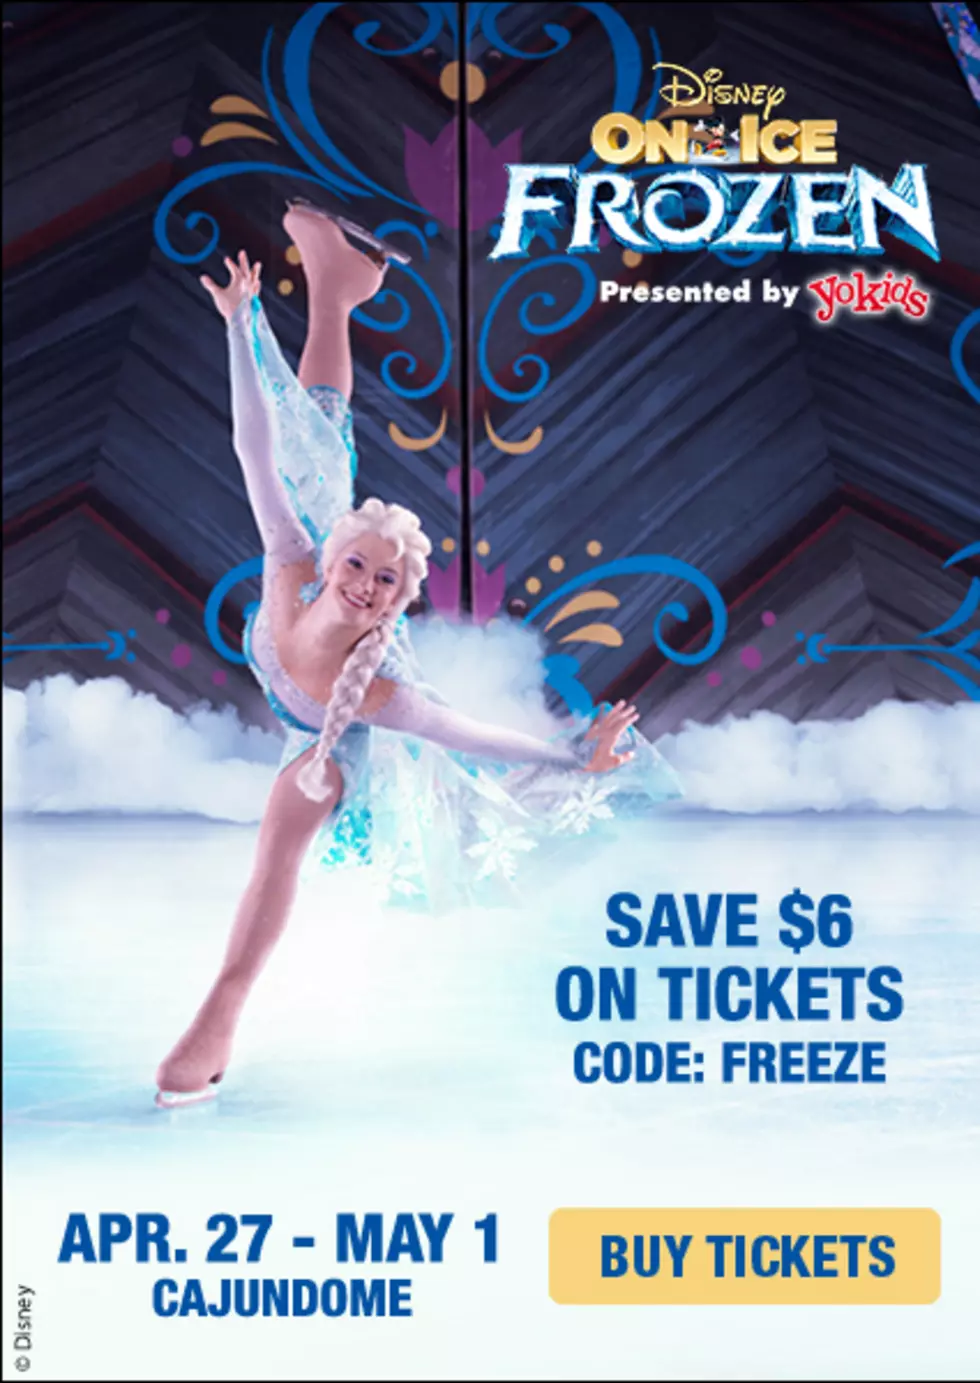 Discount Code for Disney On Ice Frozen Tickets